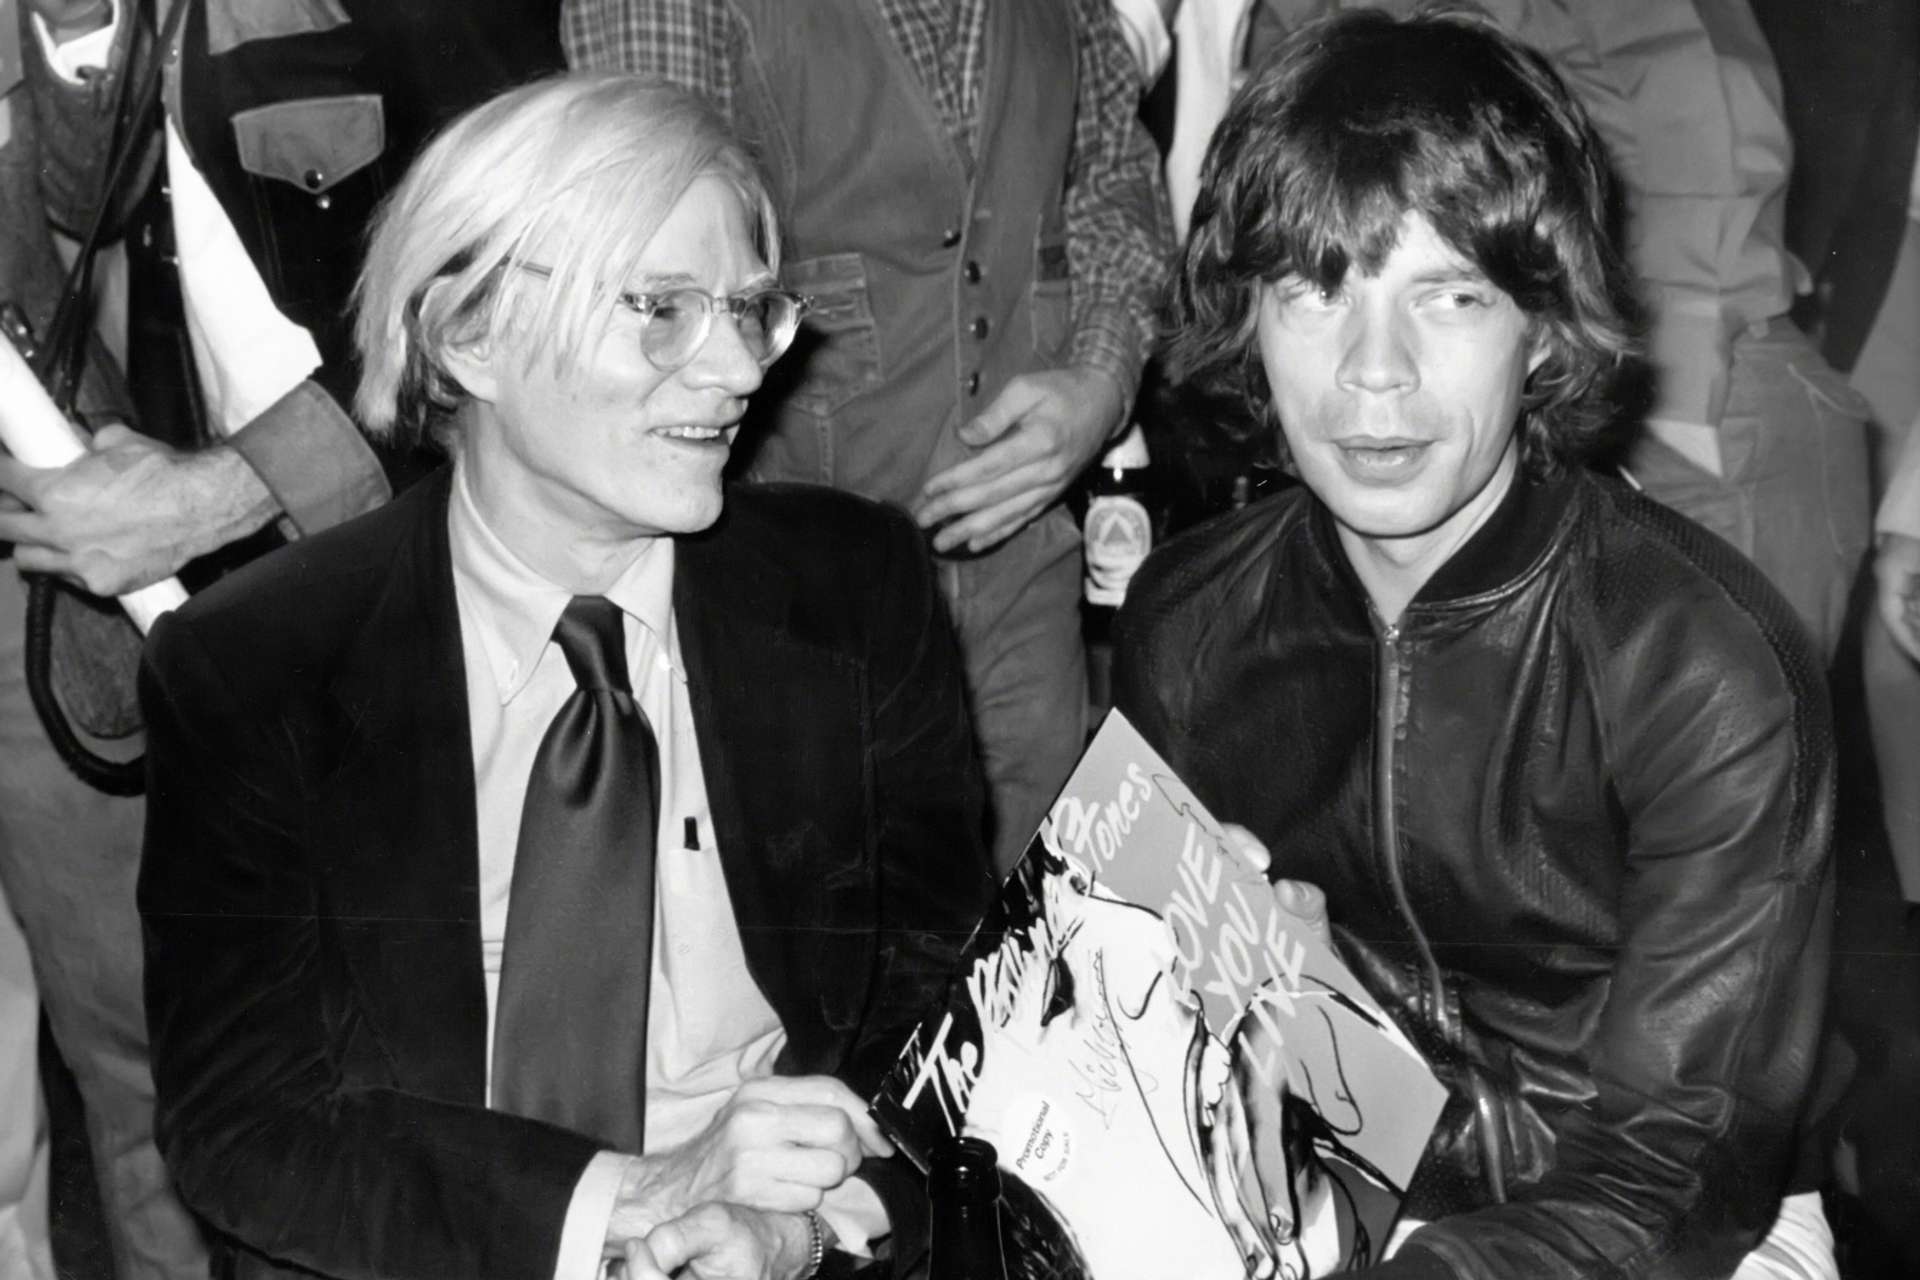 A black and white photograph of The Rolling Stones lead singer Mick Jagger and artist Andy Warhol.